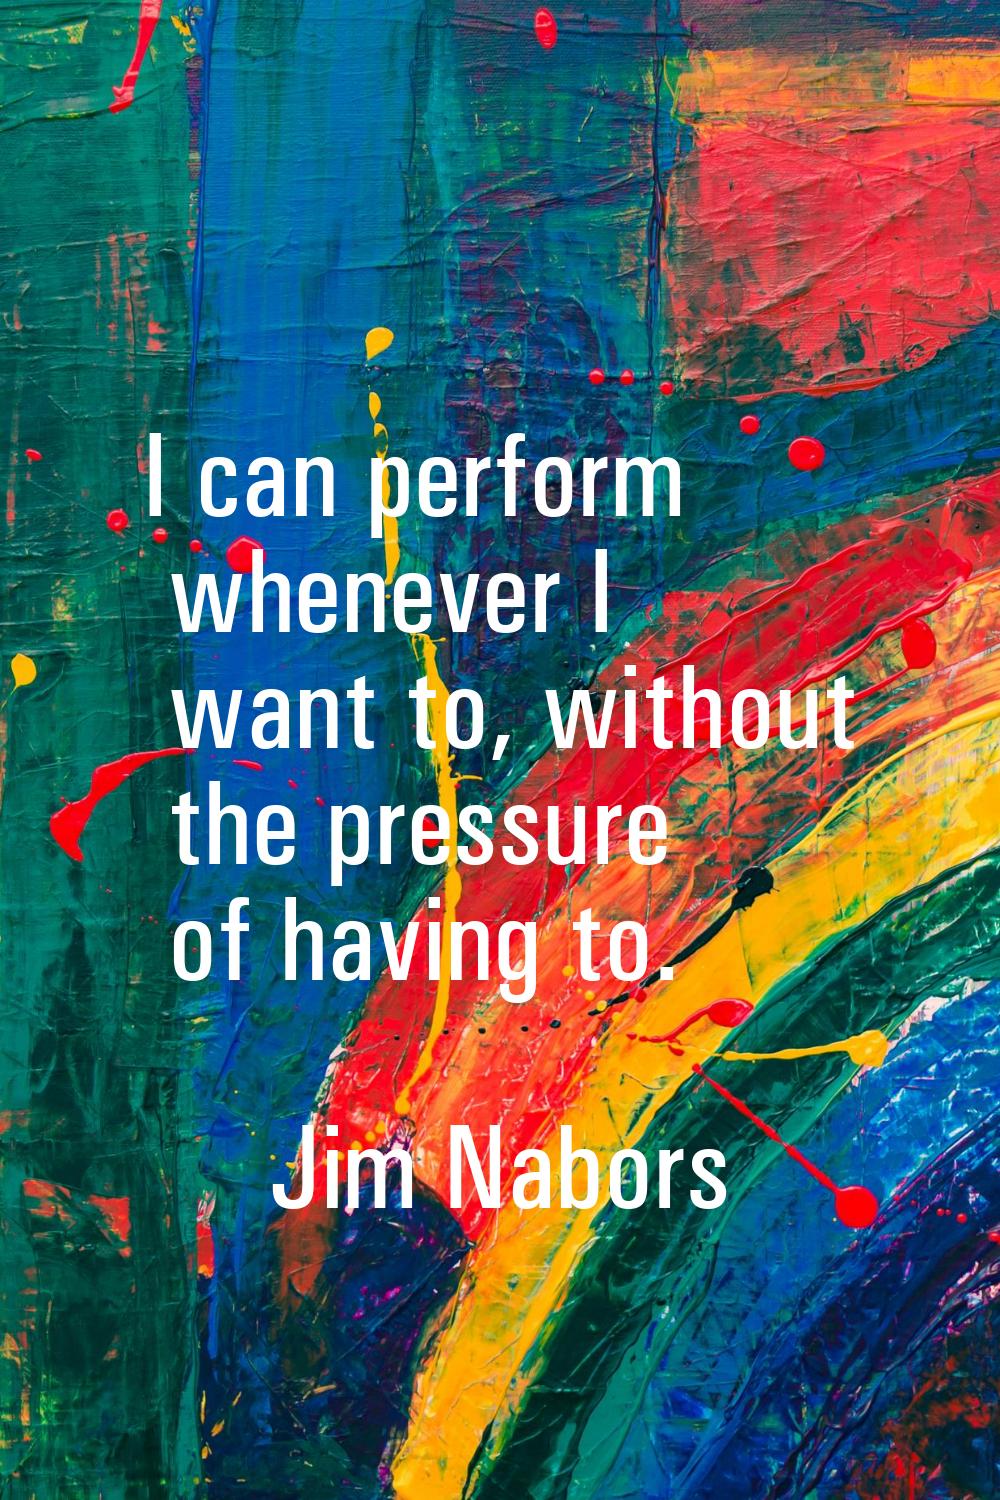 I can perform whenever I want to, without the pressure of having to.